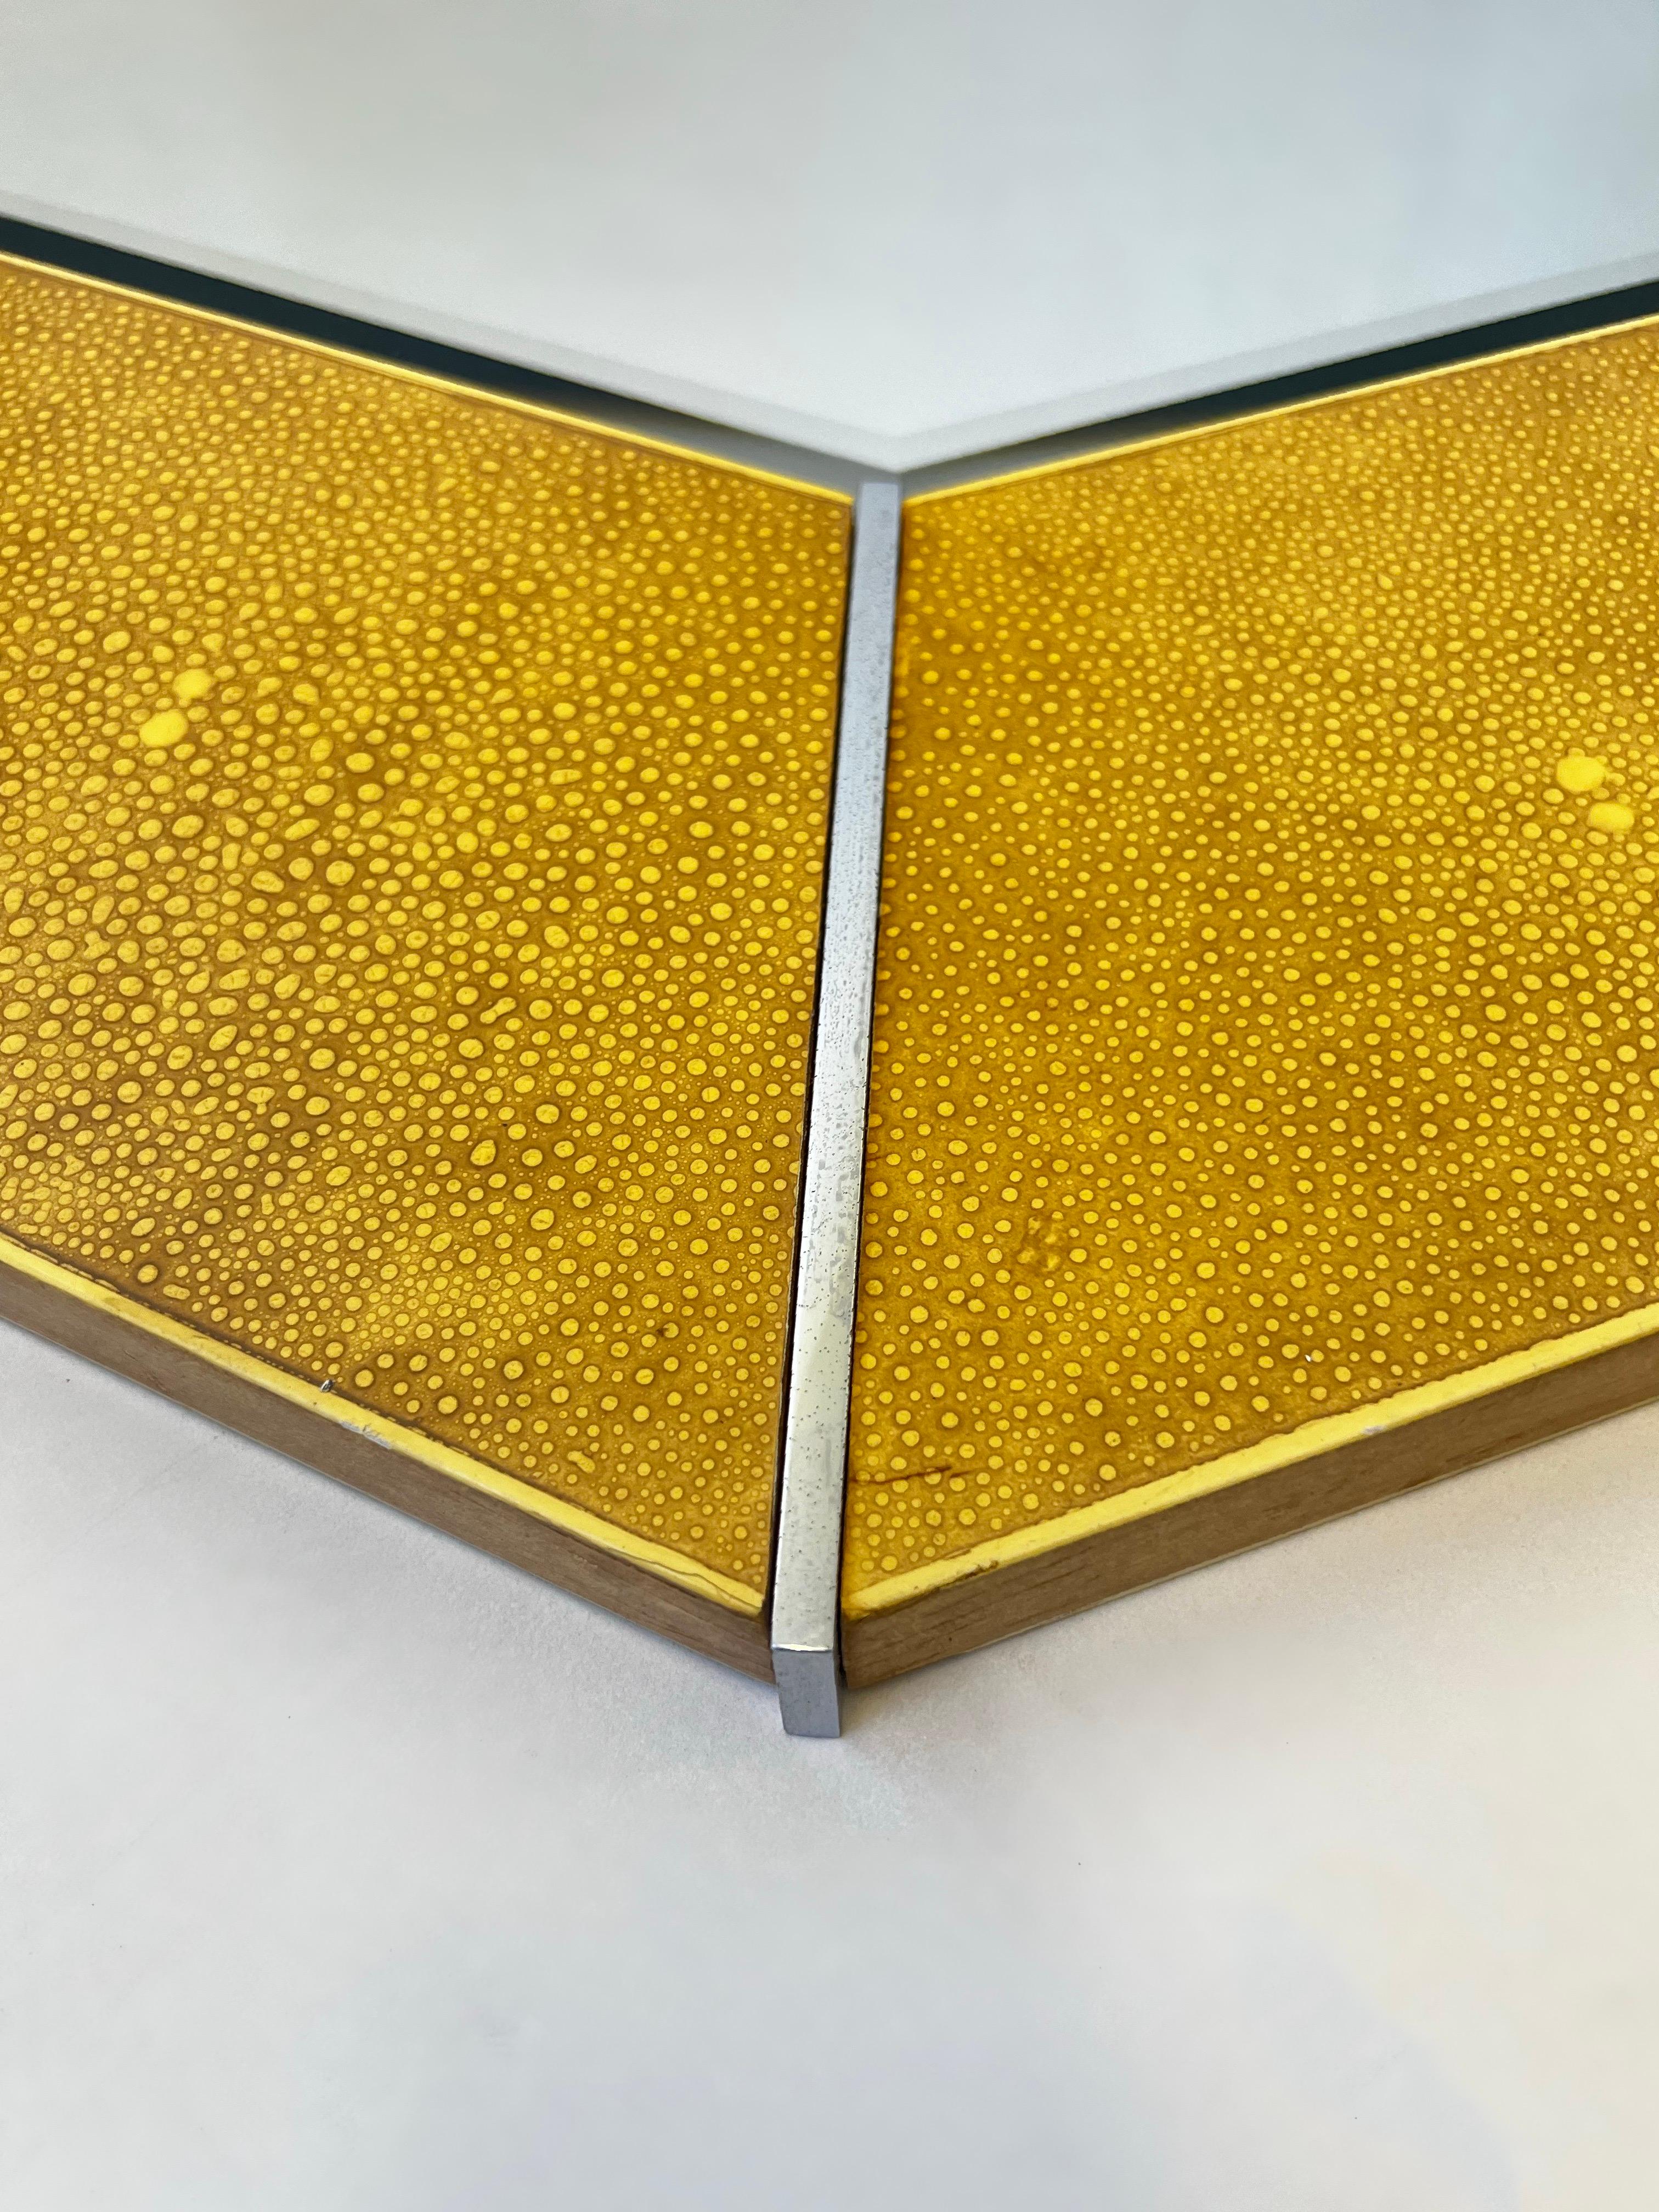 American Octagonal Shagreen Lacquer and Chrome Mirror by Karl Springer for Suzanne Sumers For Sale